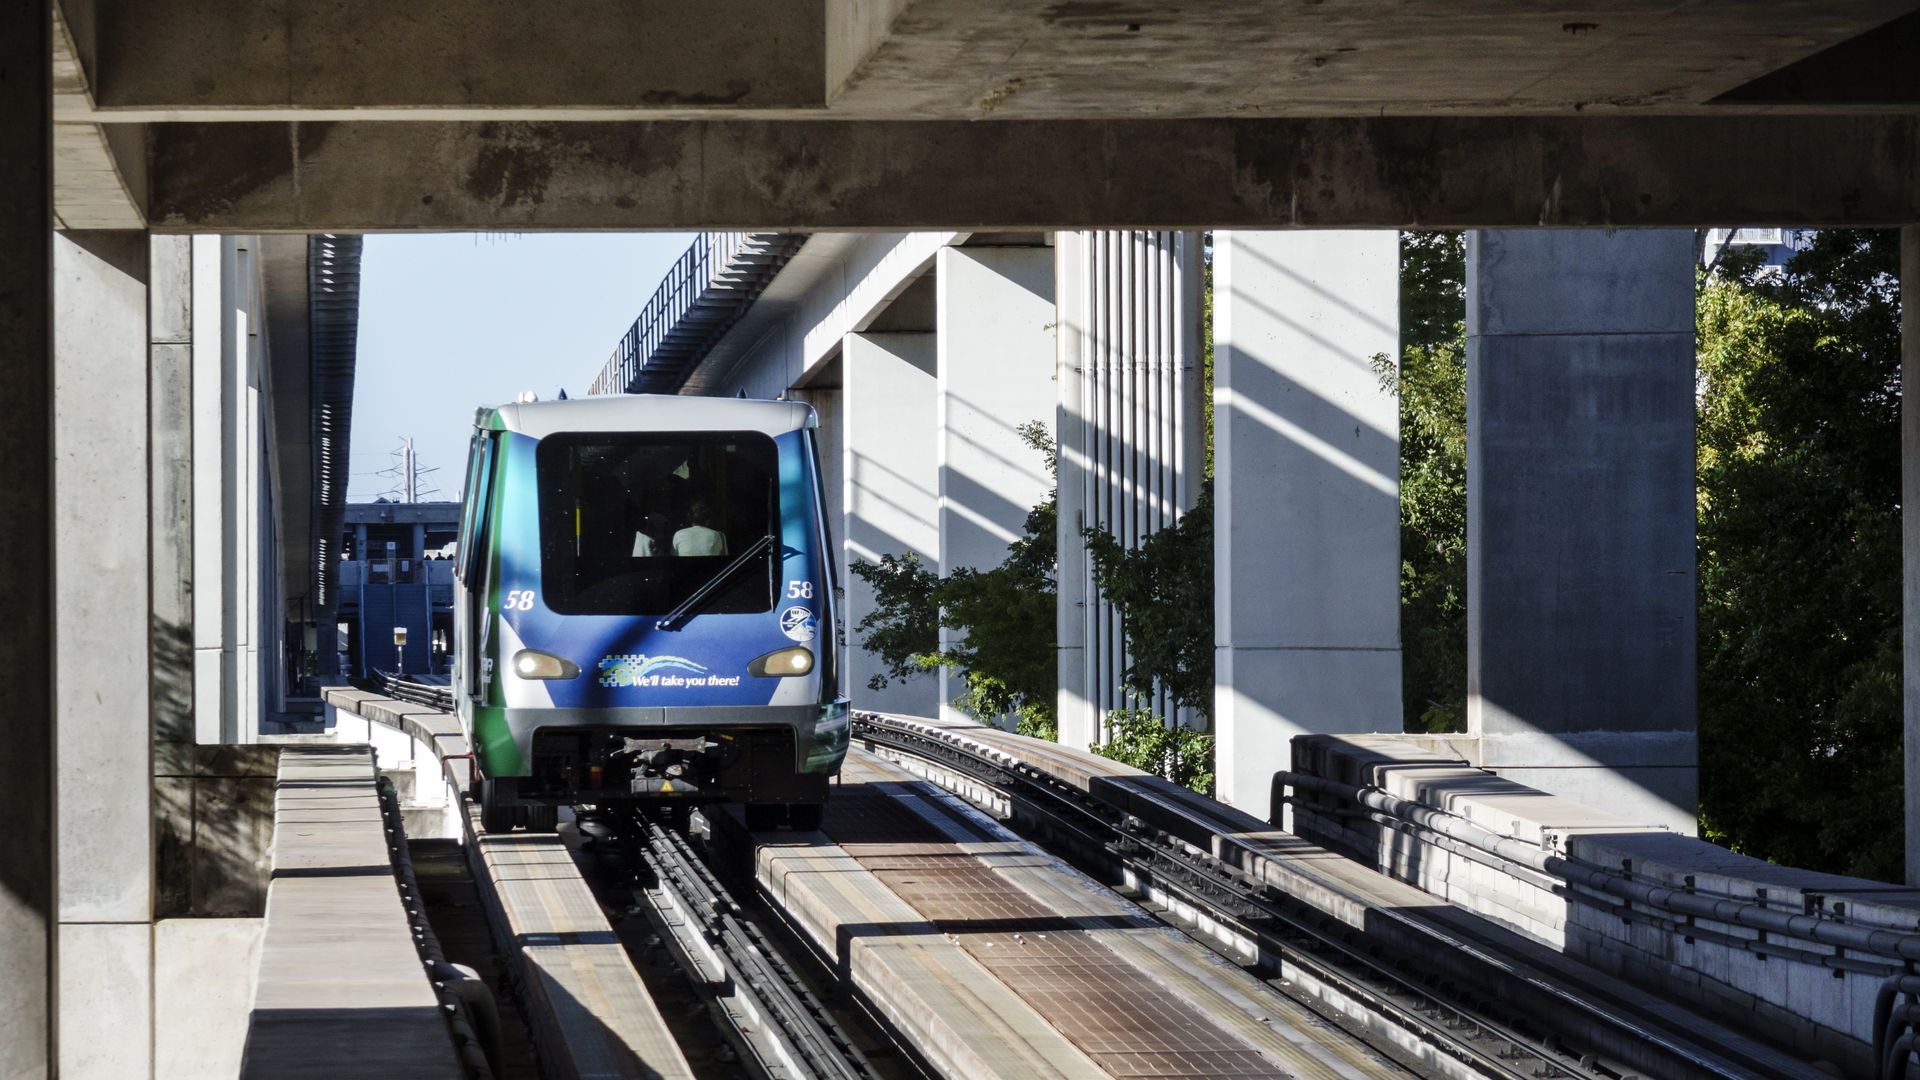 Miami-Dade's free MetroMover is pictured traveling along its rail.